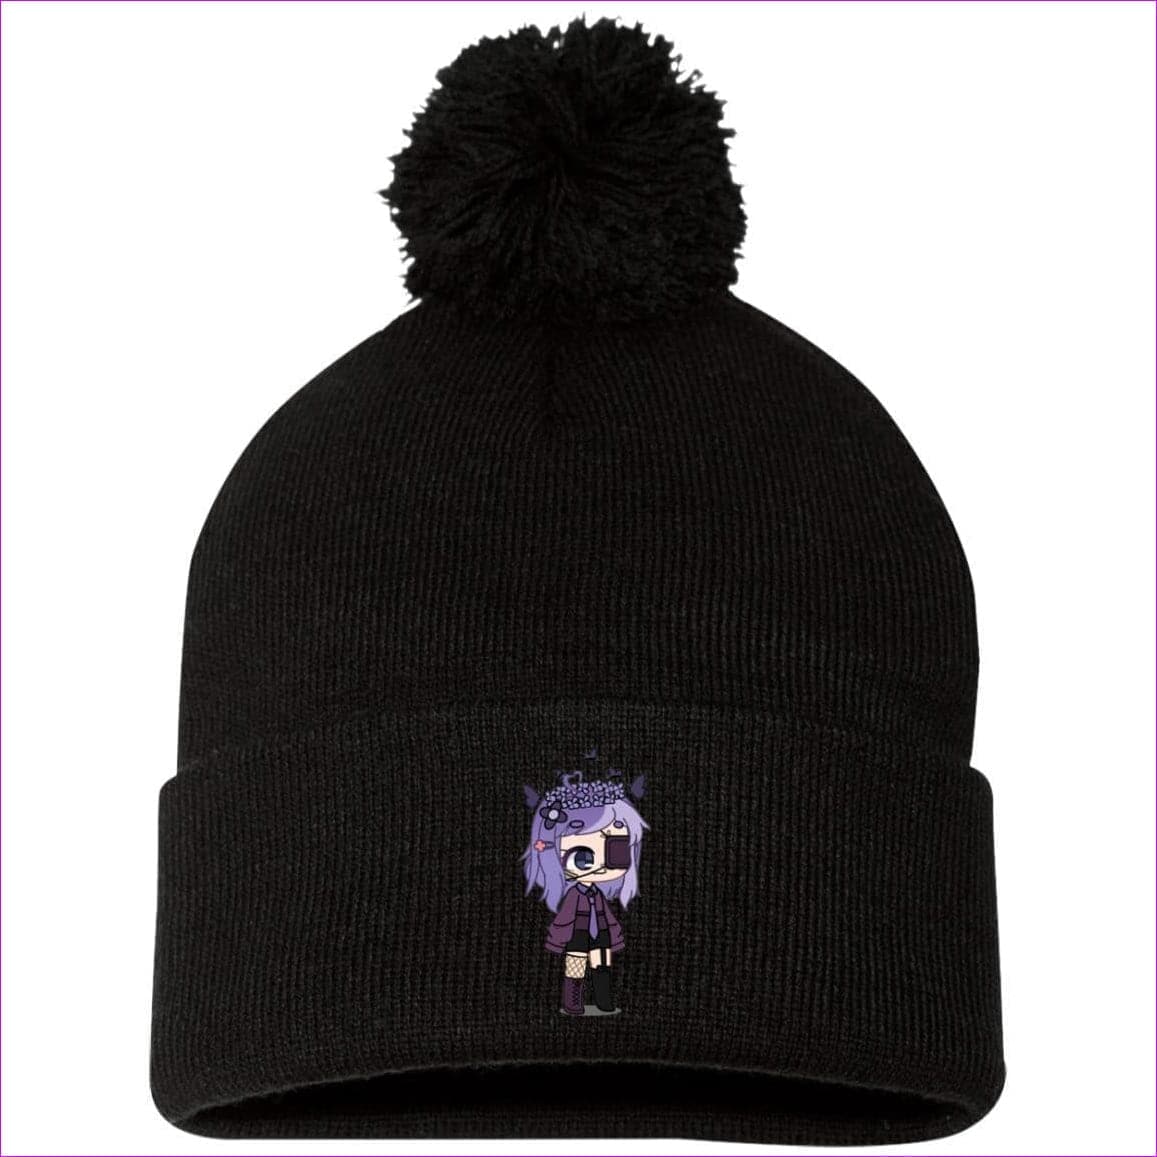 SP15 Pom Pom Knit Cap7 Black One Size - Embroidered Slouch Beanie - Beanie at TFC&H Co.